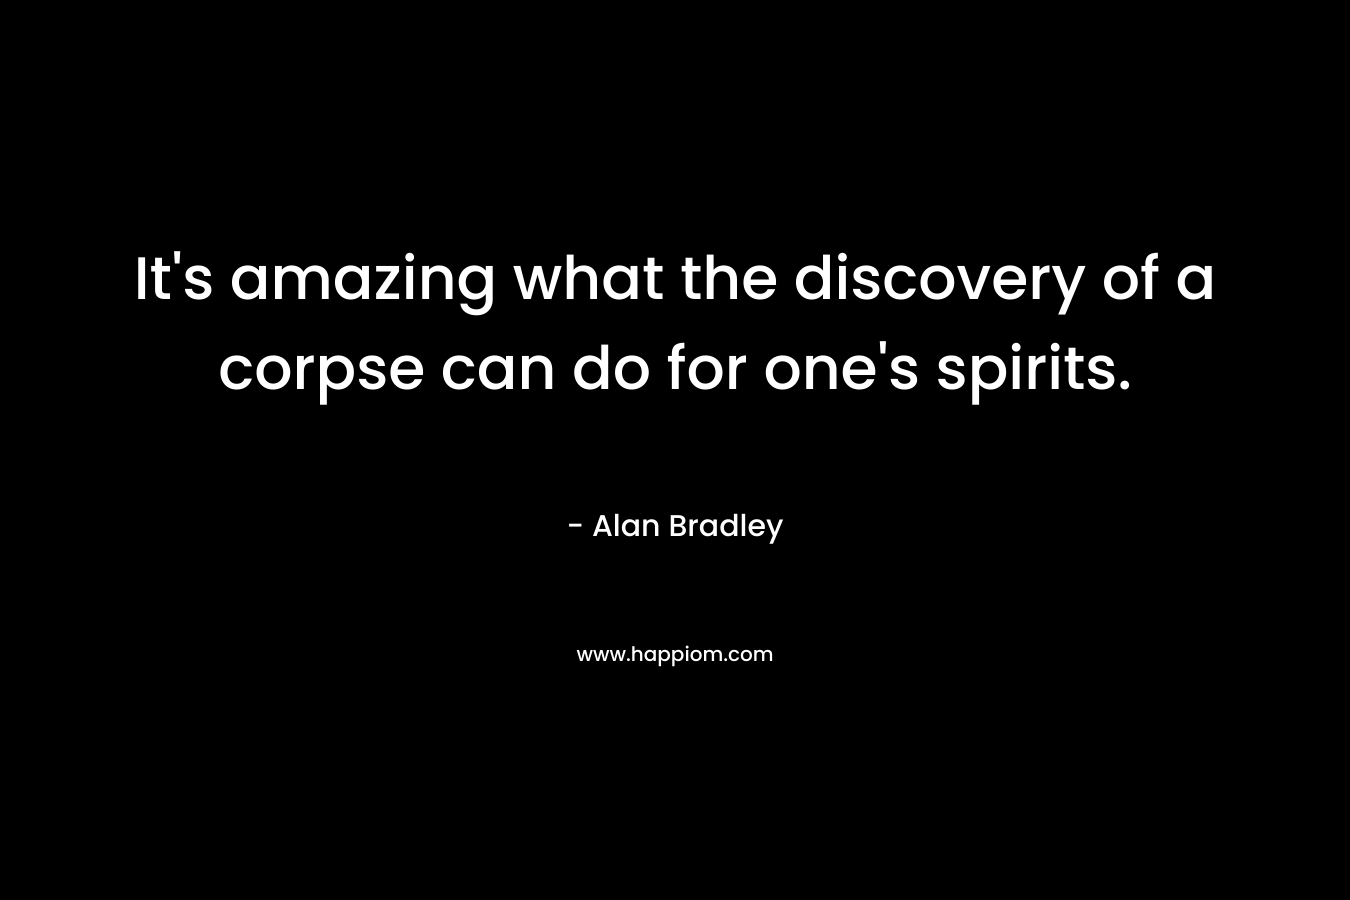 It's amazing what the discovery of a corpse can do for one's spirits.